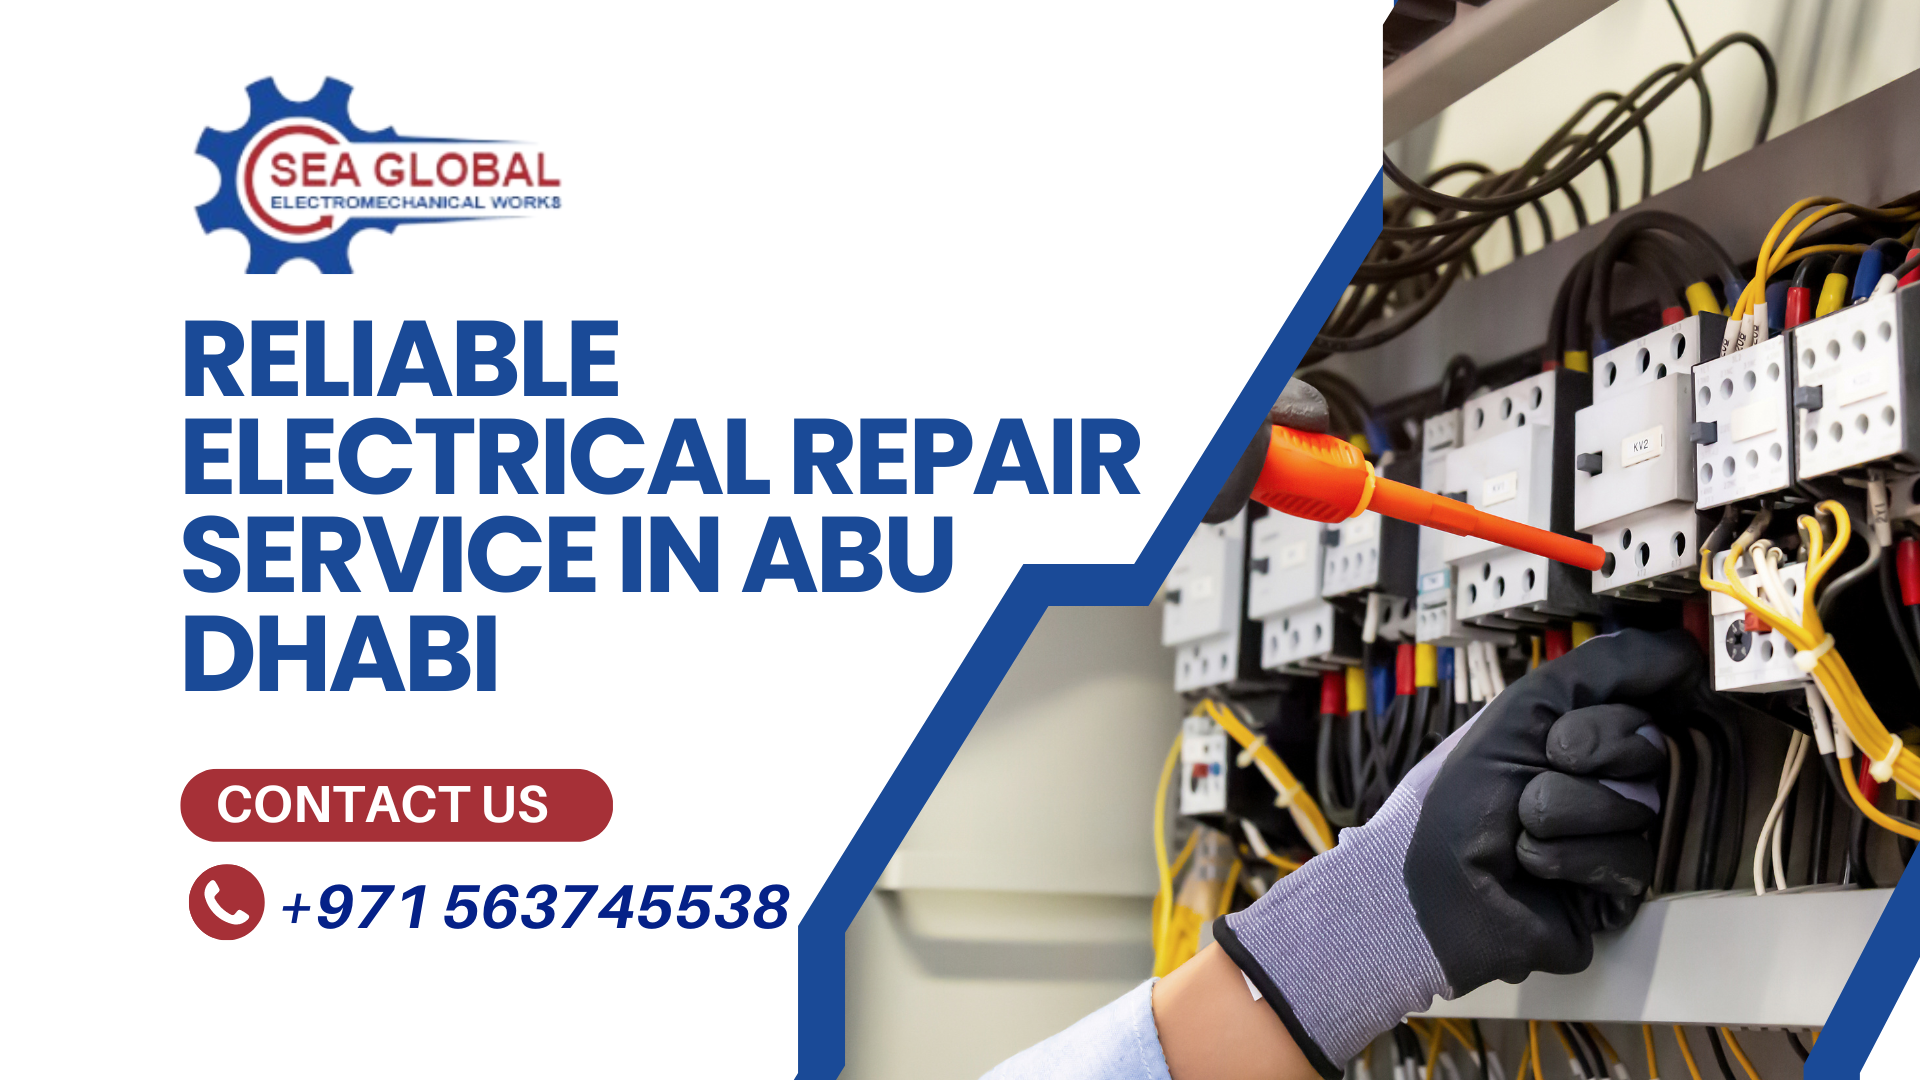 Reliable Electrical Repair Service in Abu Dhabi